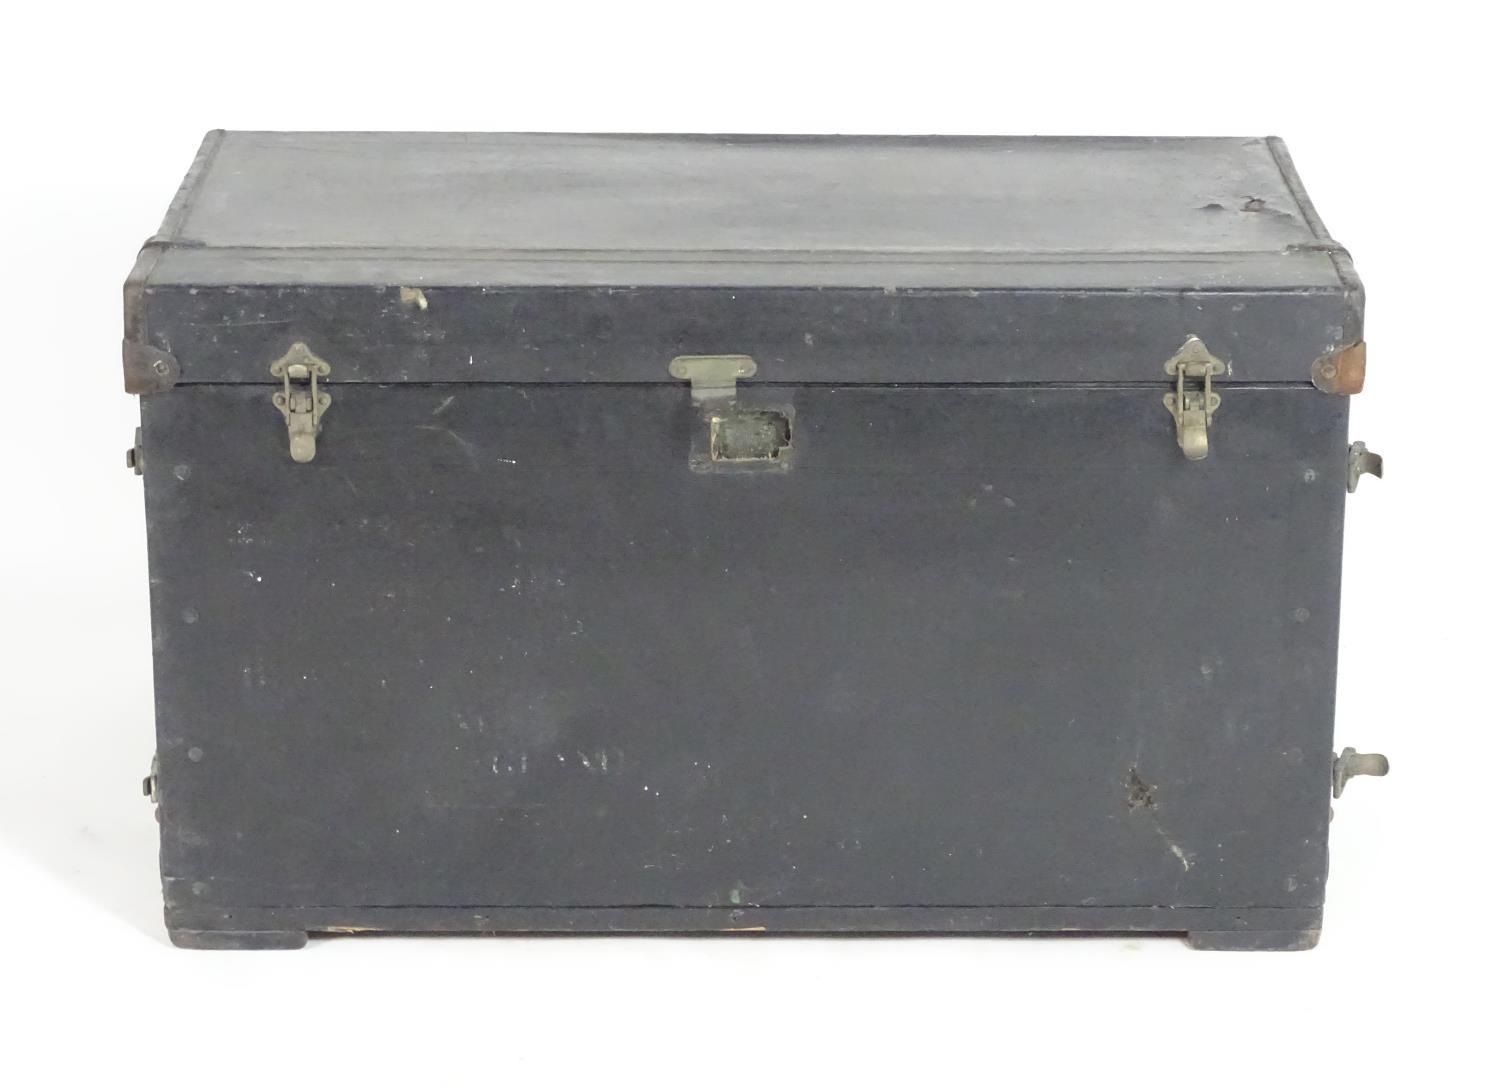 Classic cars, motoring: an early to mid 20thC Brooks external car trunk / luggage case, of - Image 3 of 7